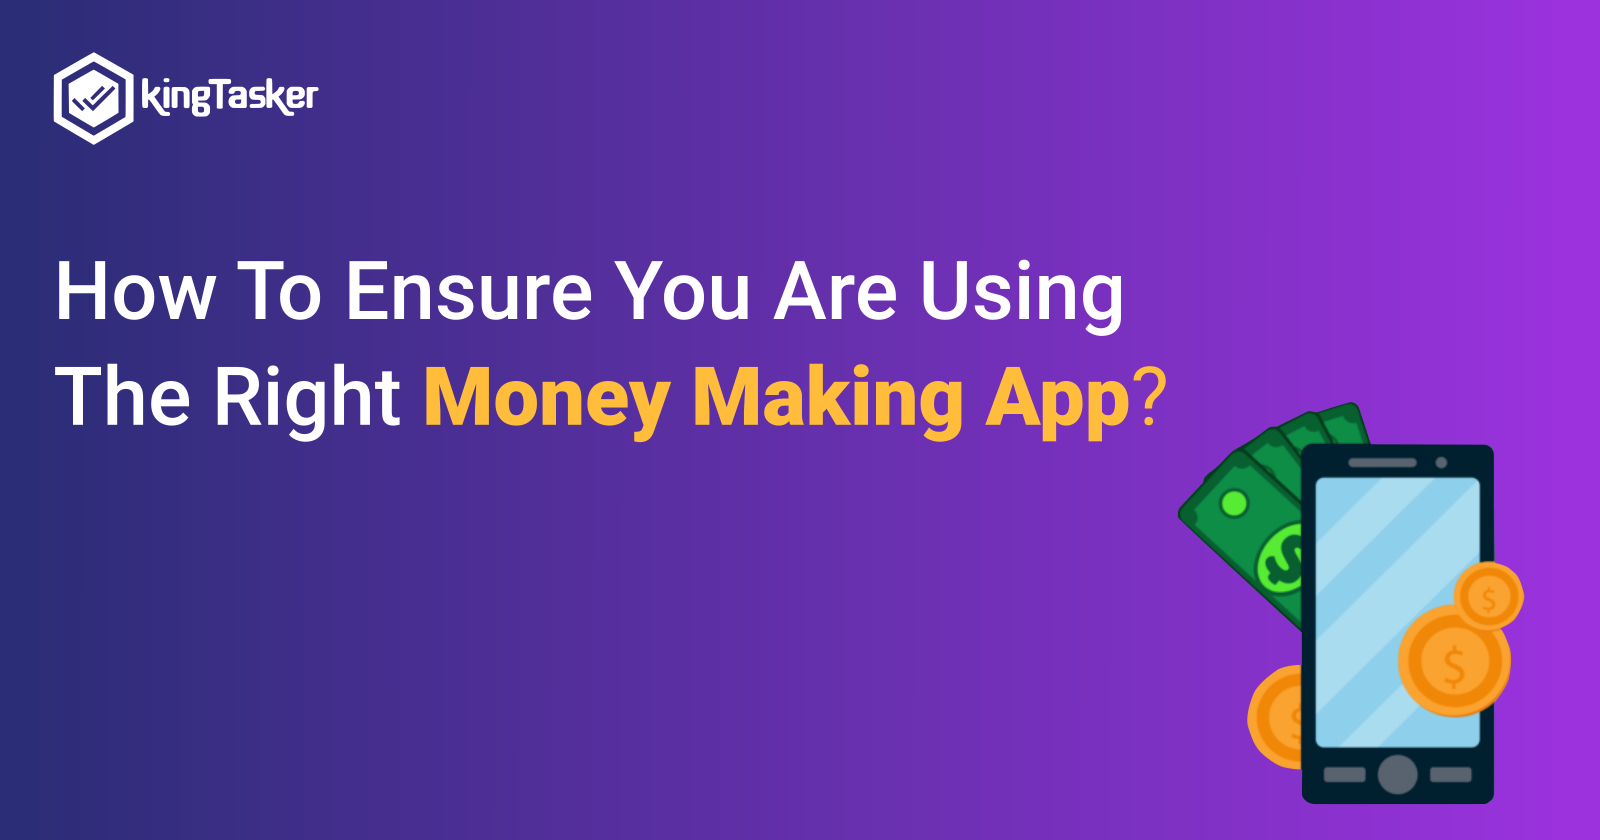 How To Ensure You Are Using The Right Money Making App?